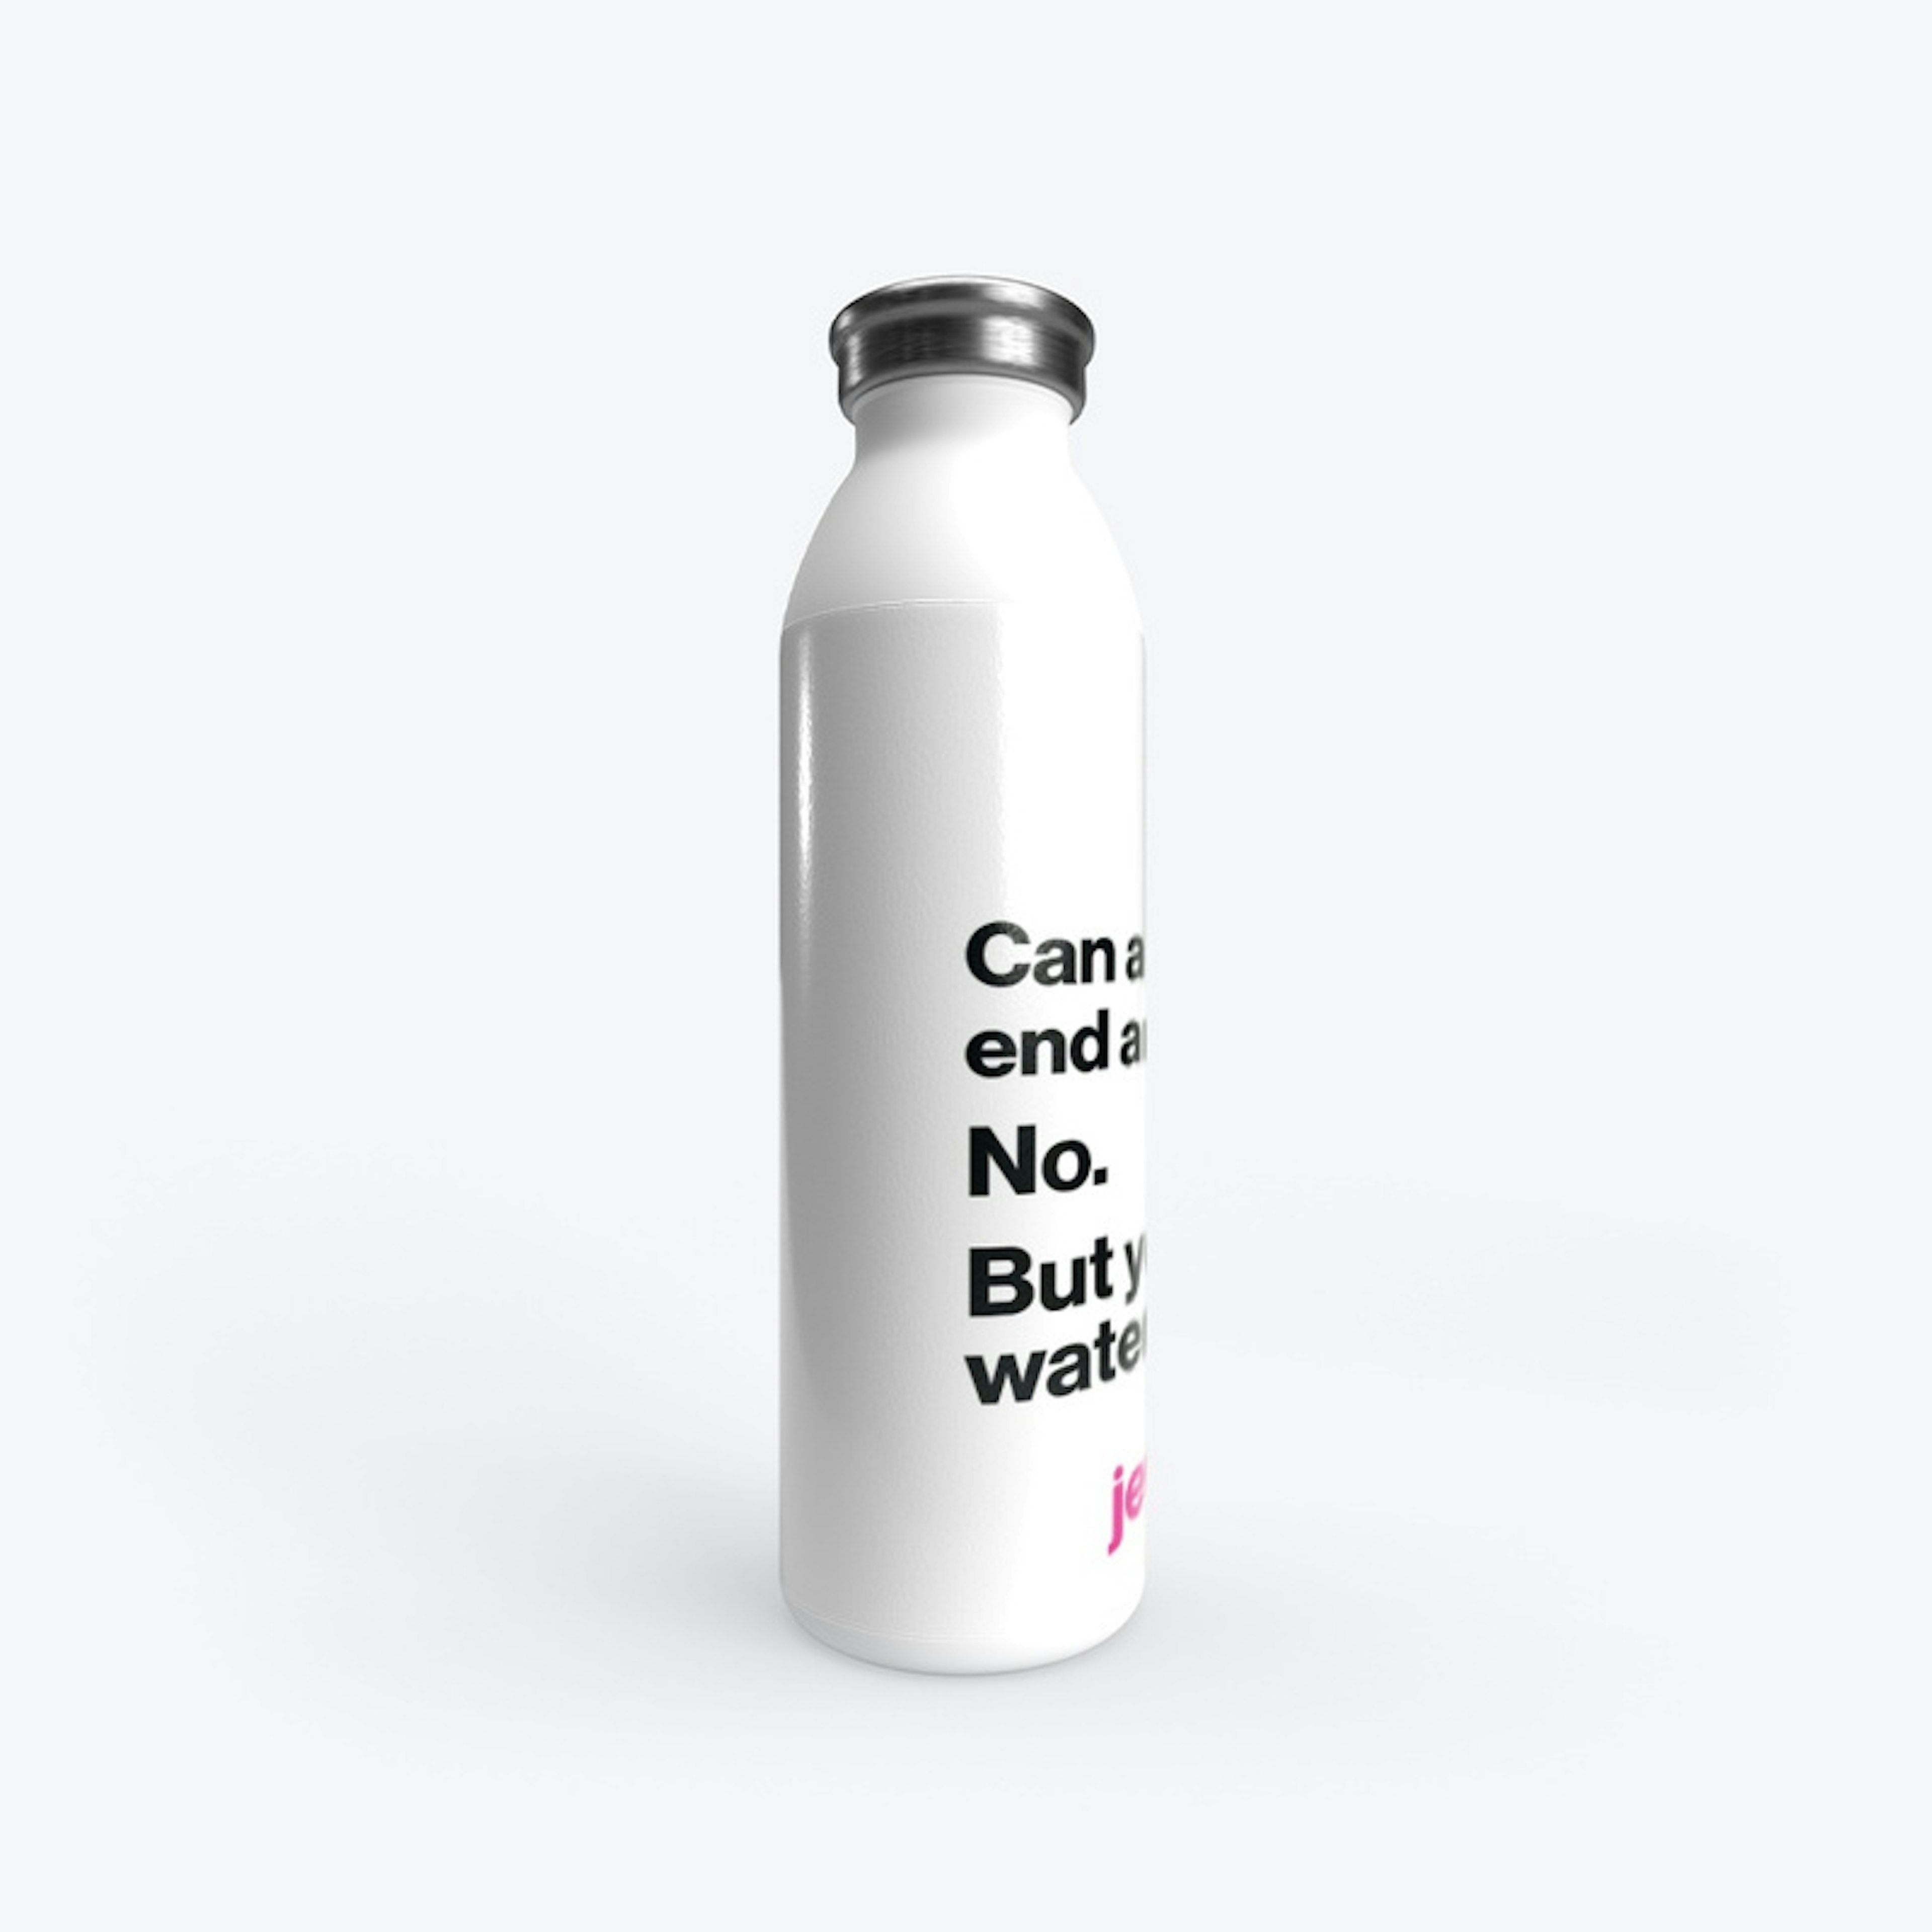 Stainless steel water bottle with logo